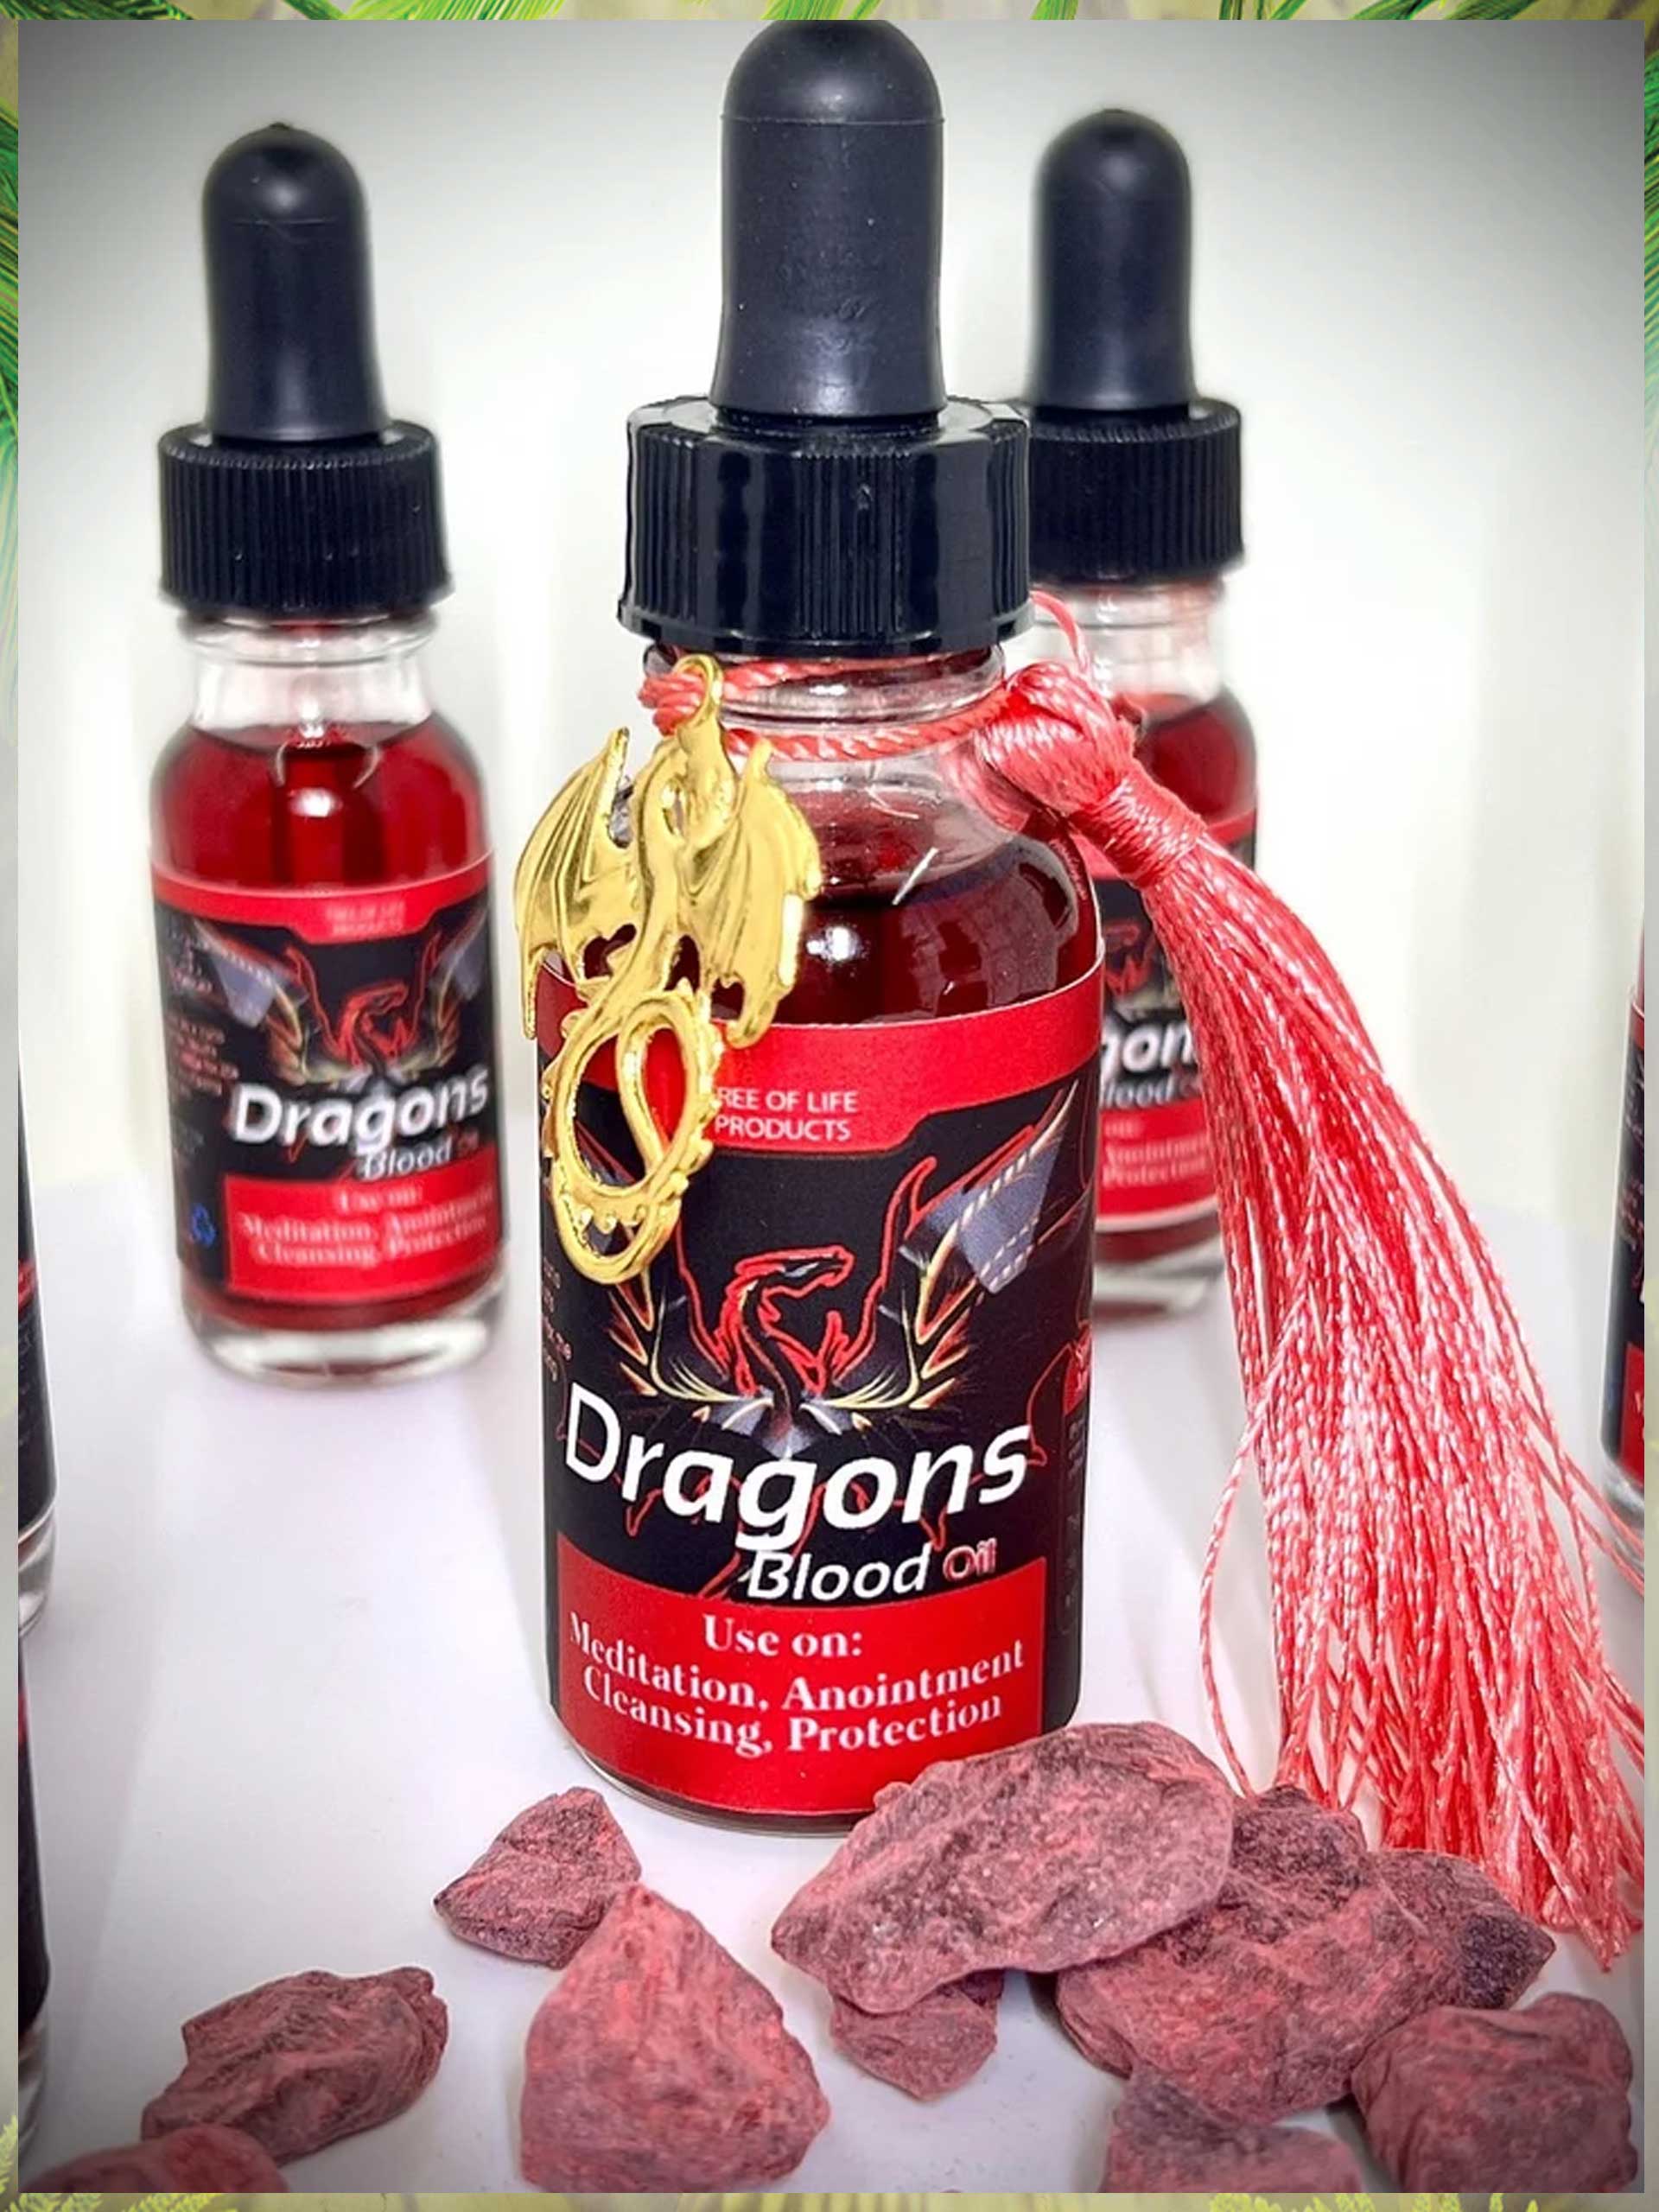 Healing Wishes - This Dragons blood essential oil is made by our